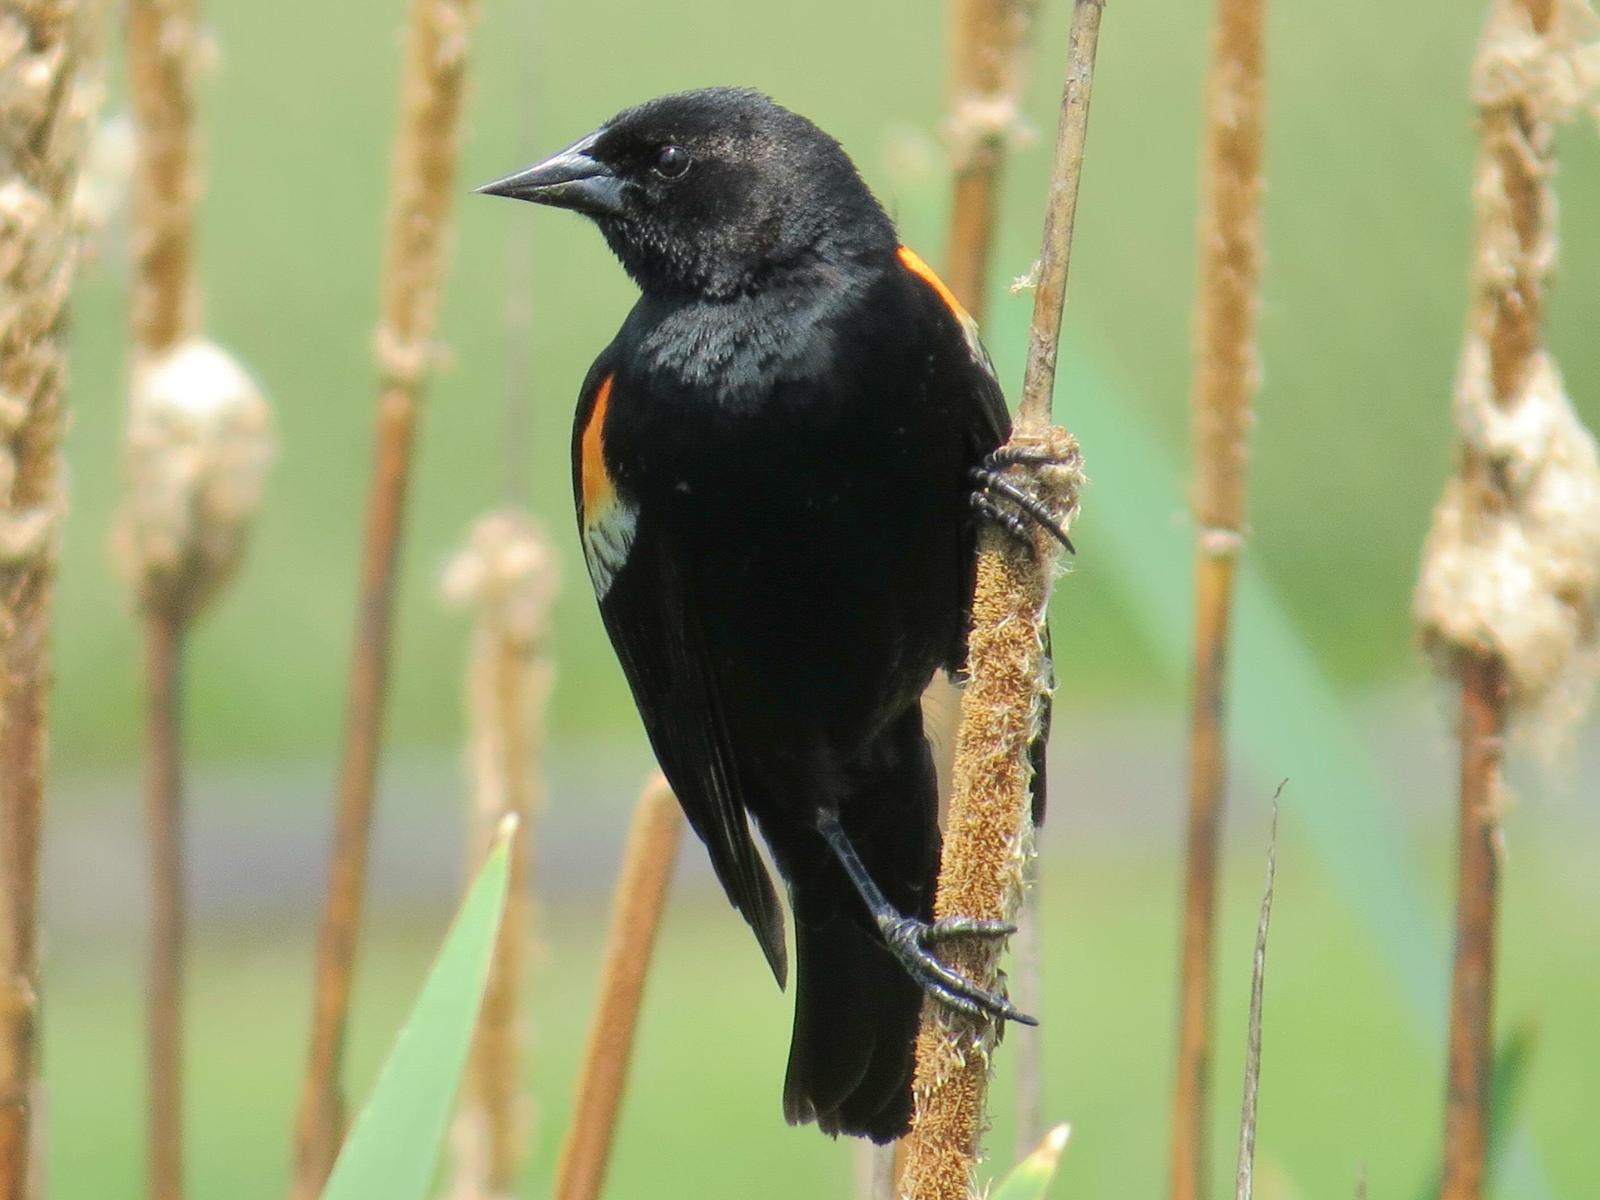 Red-winged Blackbird (Red-winged) Photo by Kathy Wooding